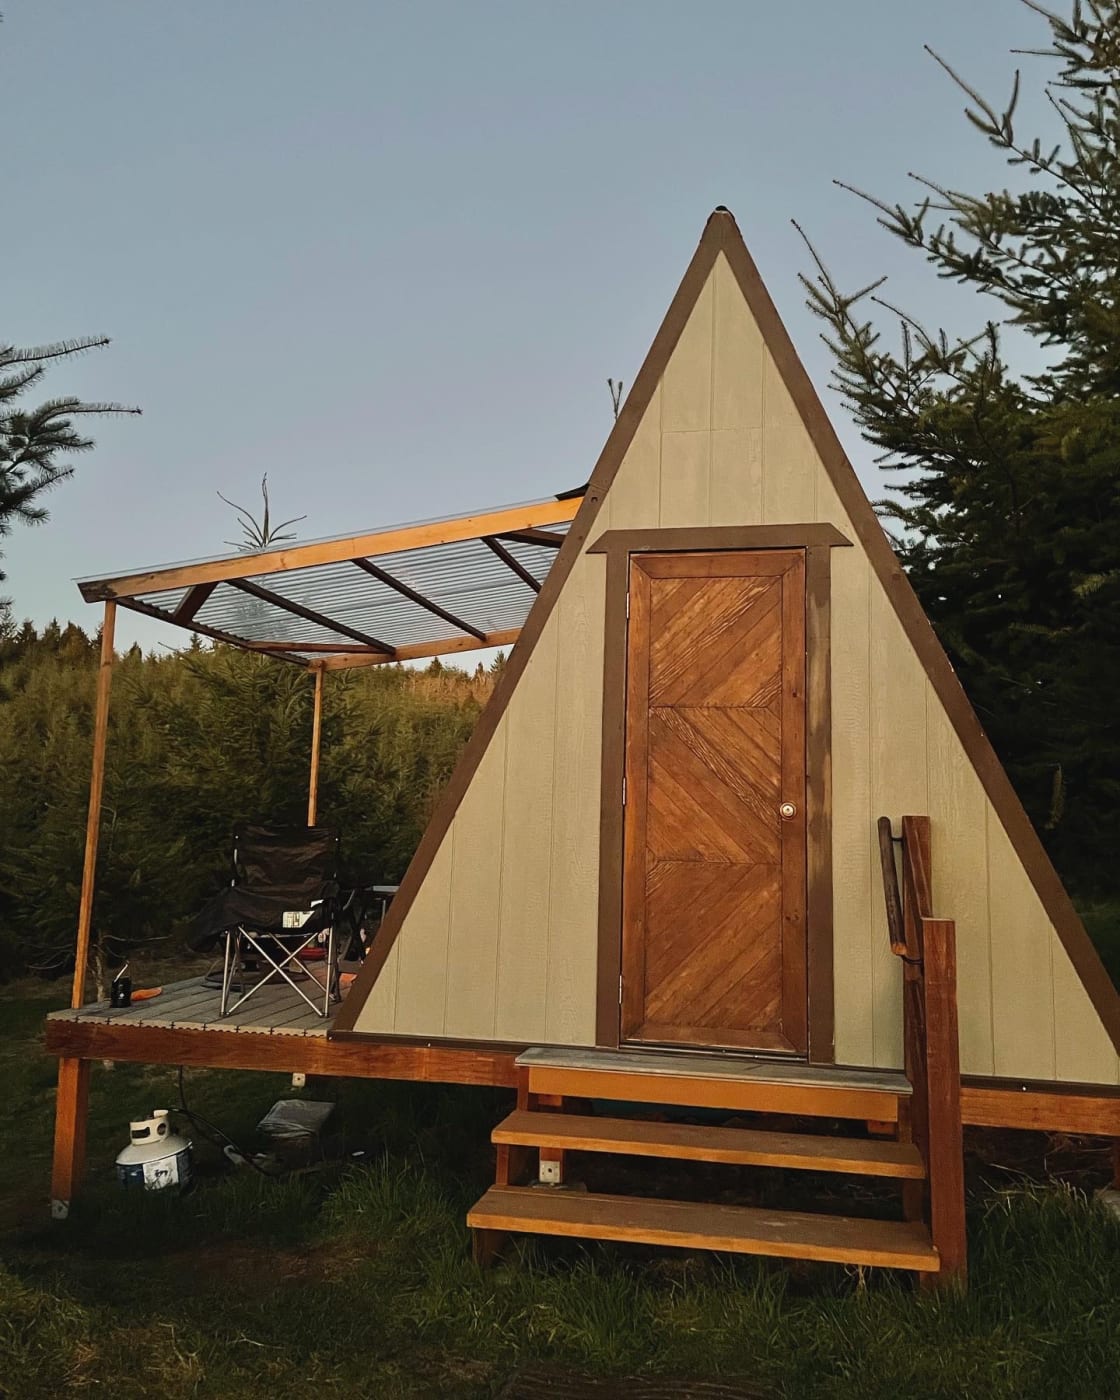 The little A-frame cabin 